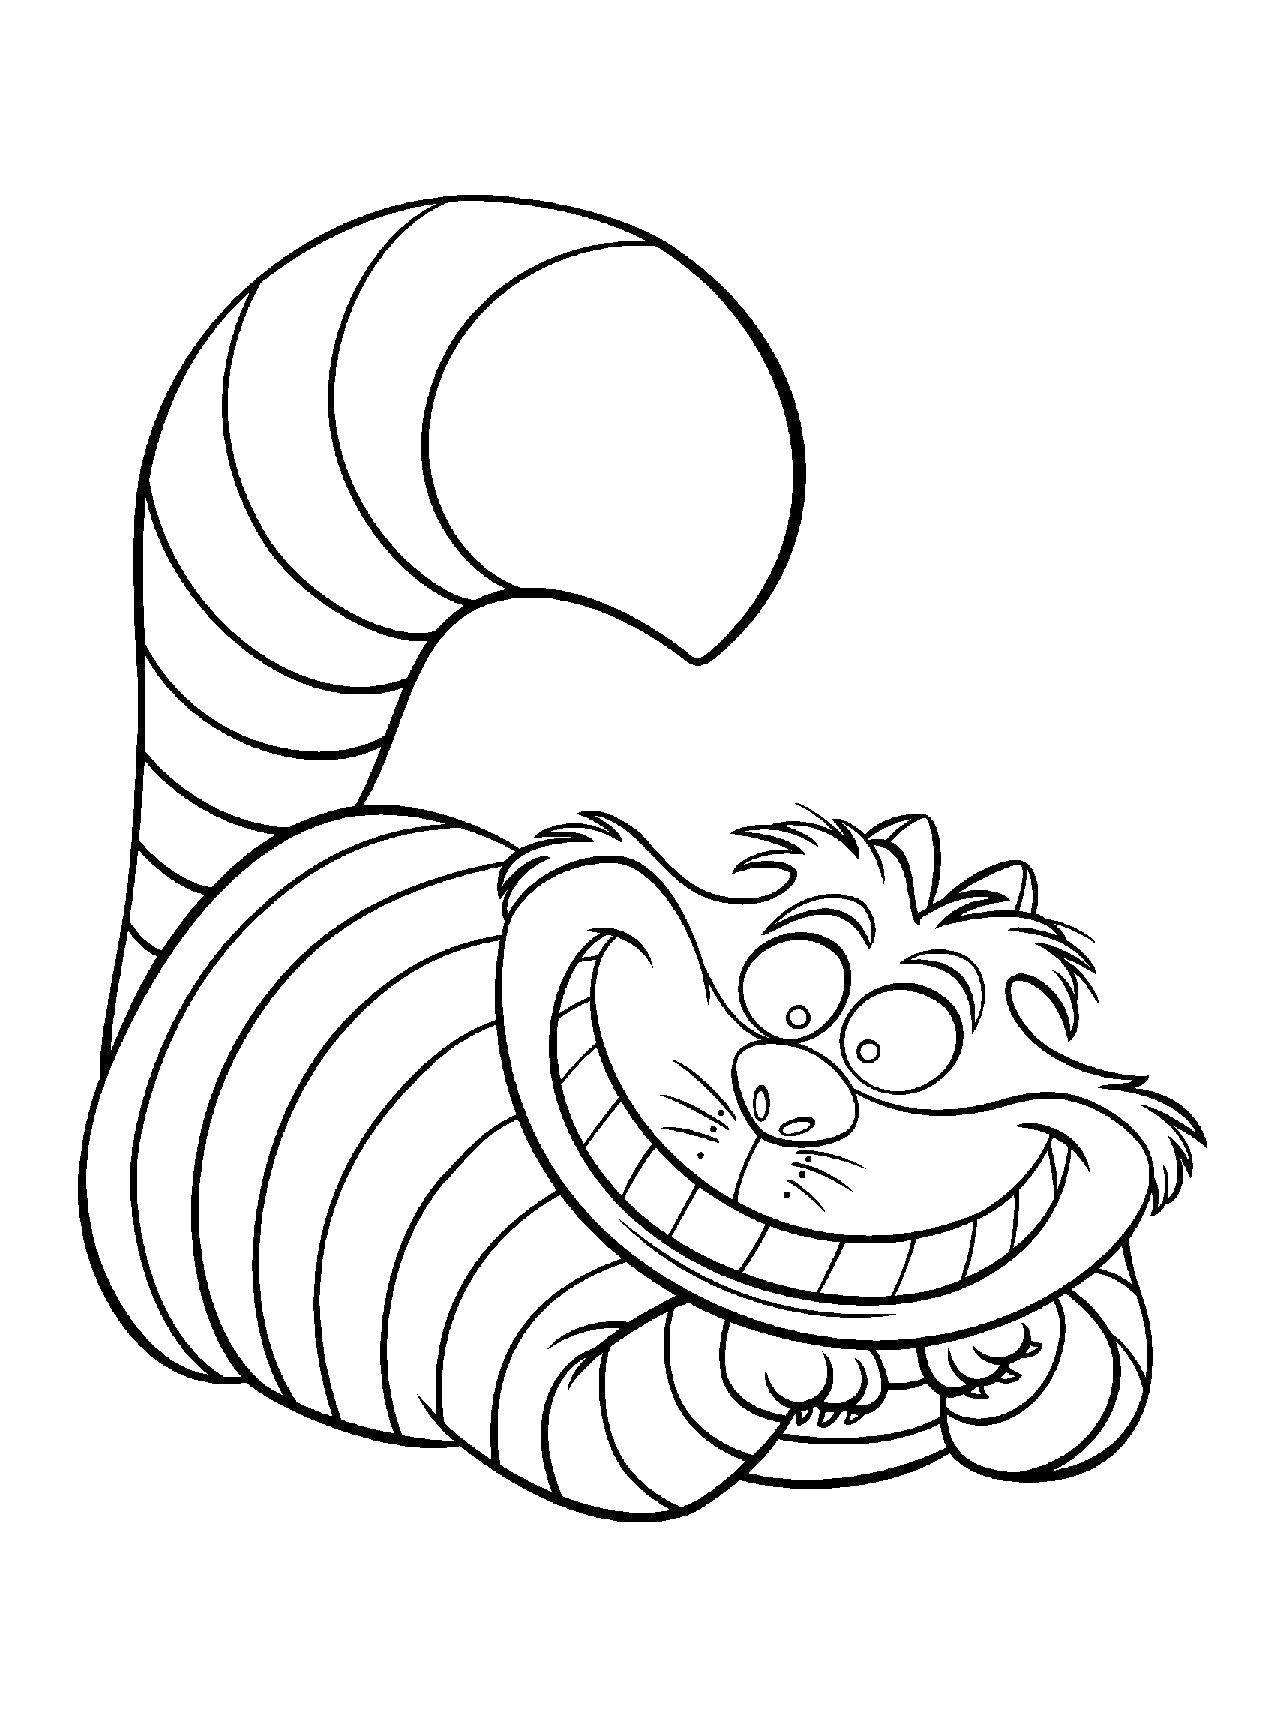 Coloring Cheshire cat.. Category coloring. Tags:  fairy tales , Alice in Wonderland, cat.